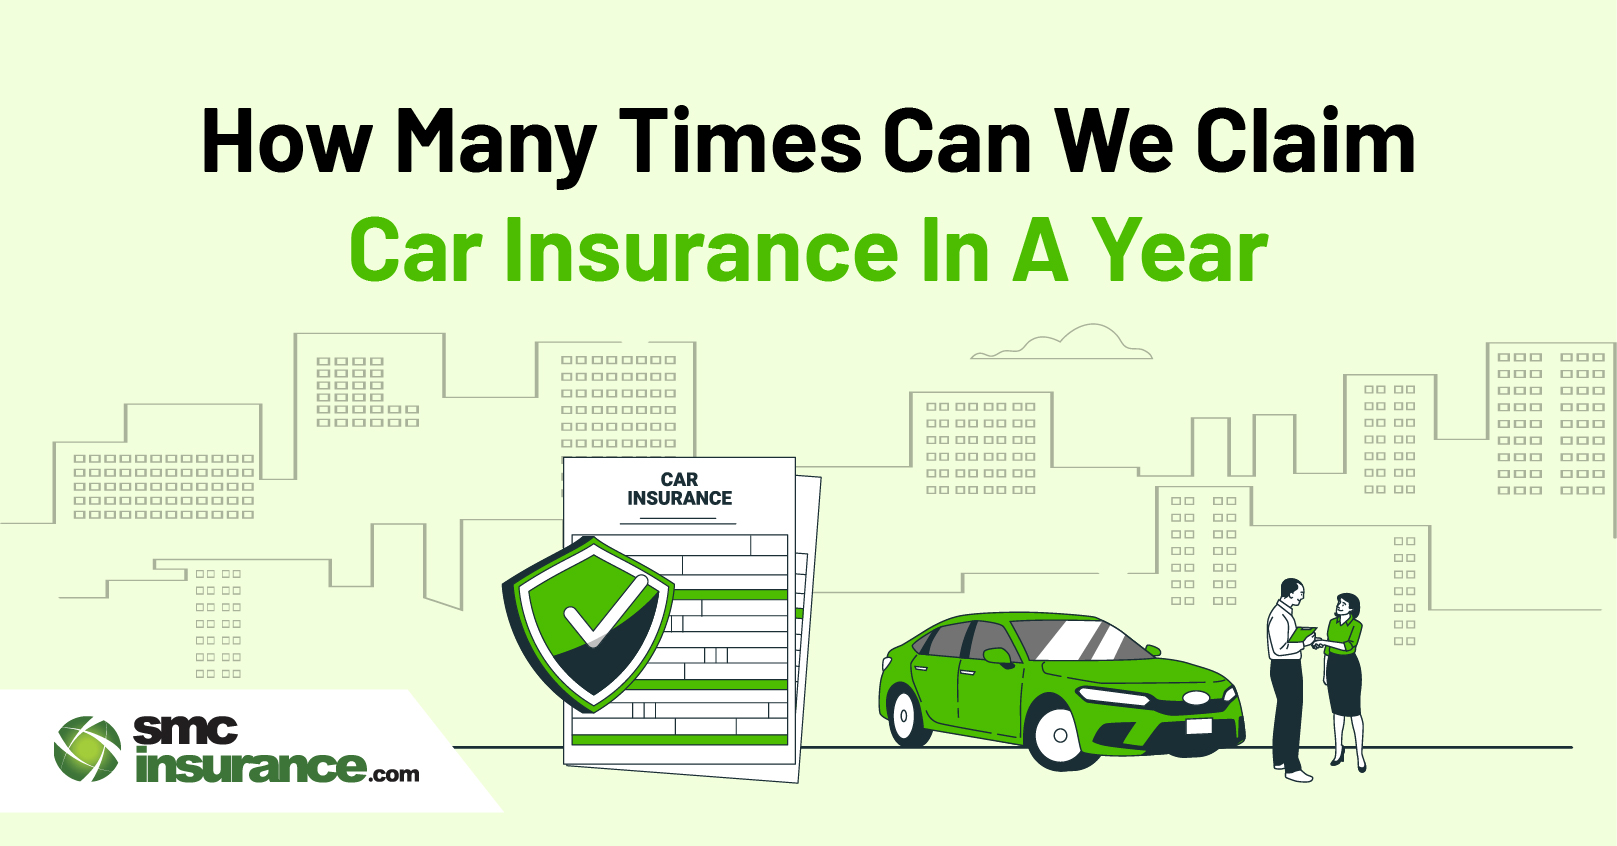 How Many Times Can We Claim Car Insurance In A Year?